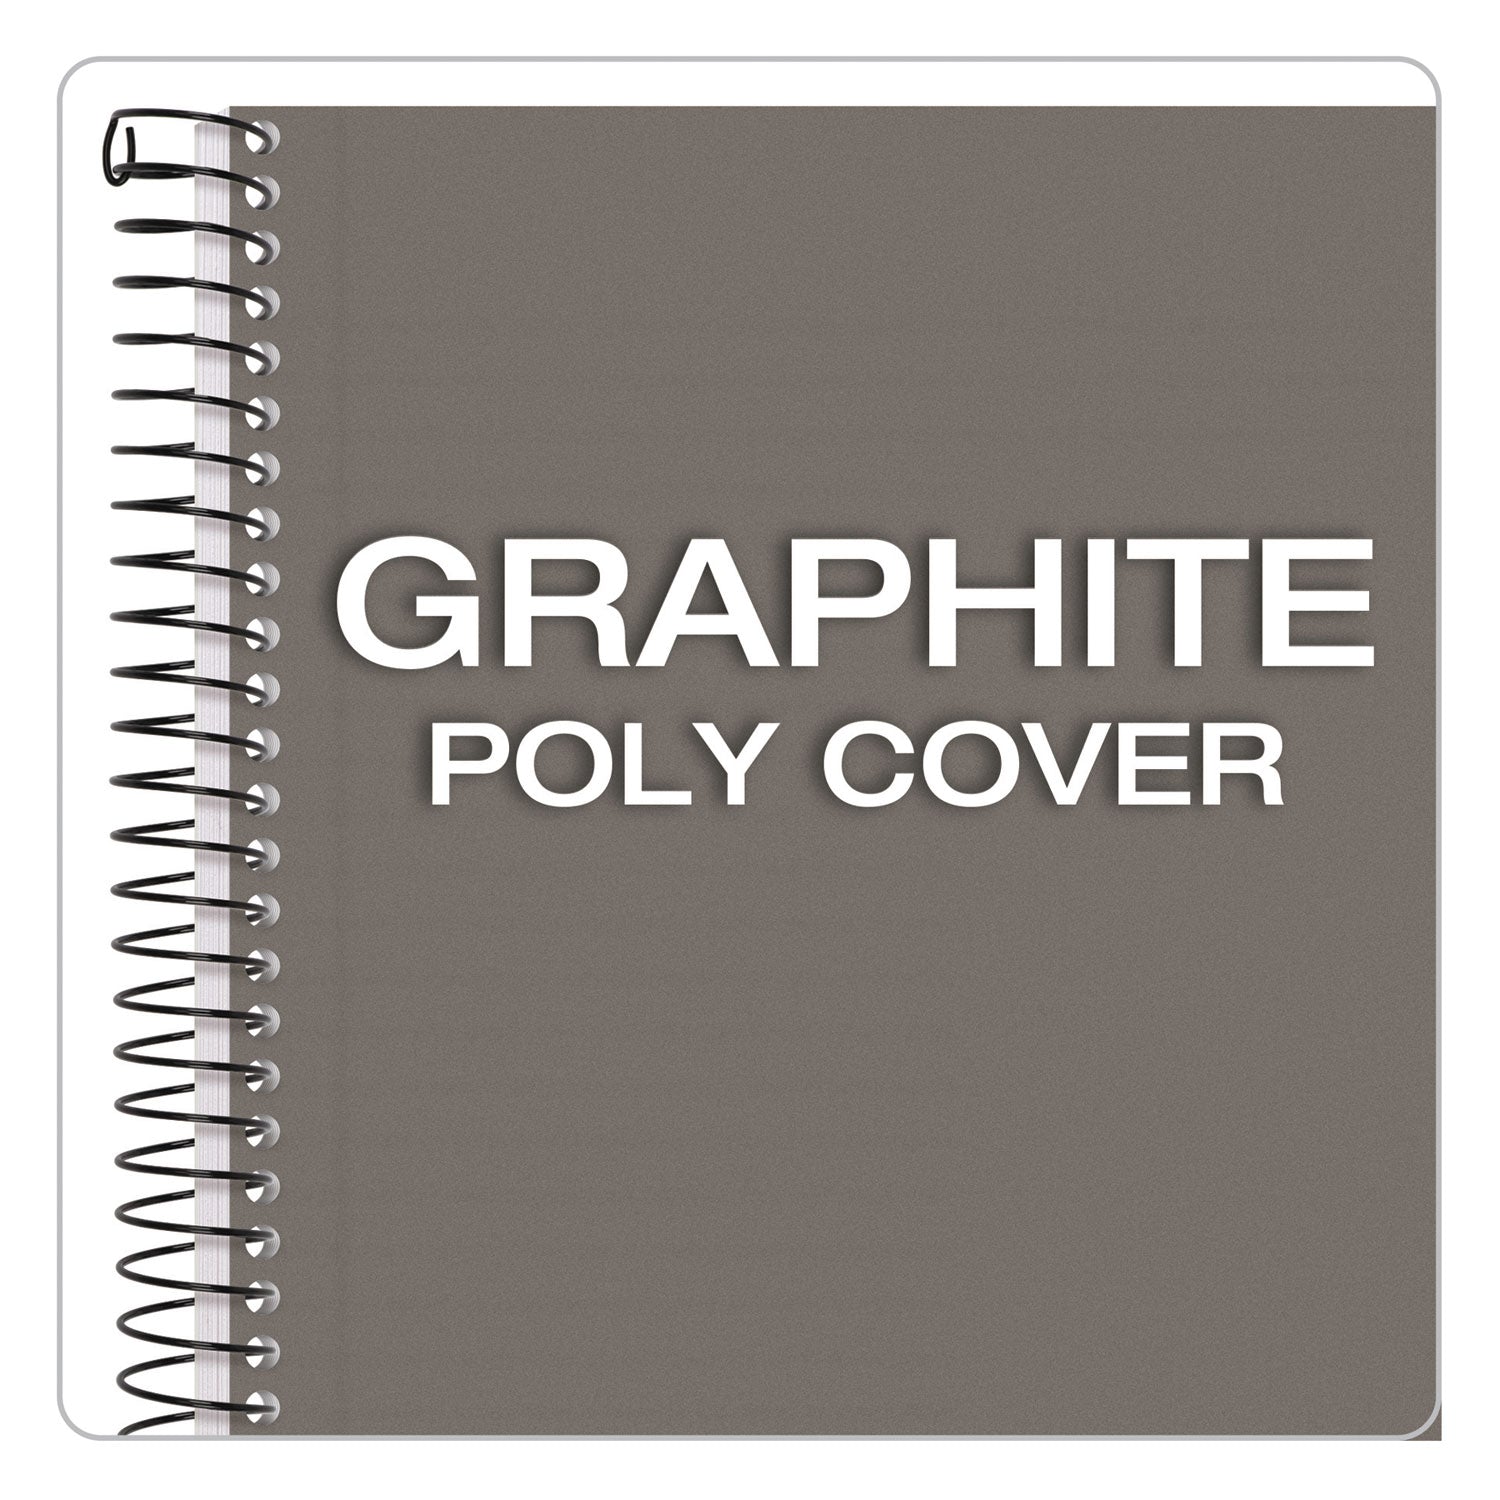 Color Notebooks, 1-Subject, Narrow Rule, Graphite Cover, (100) 8.5 x 5.5 White Sheets - 